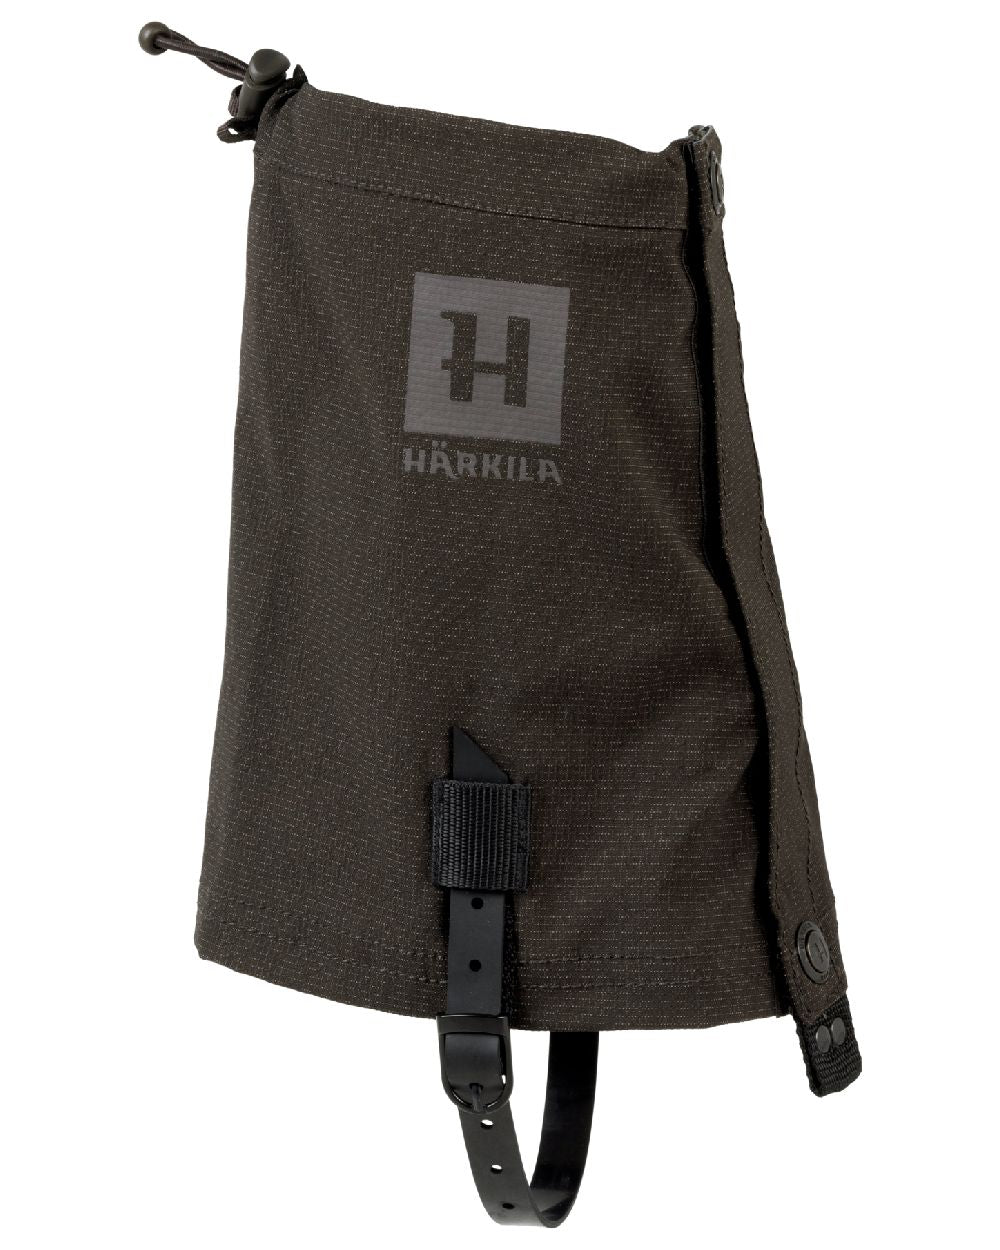 Shadow Brown coloured Harkila Ledge Gaiters on white background